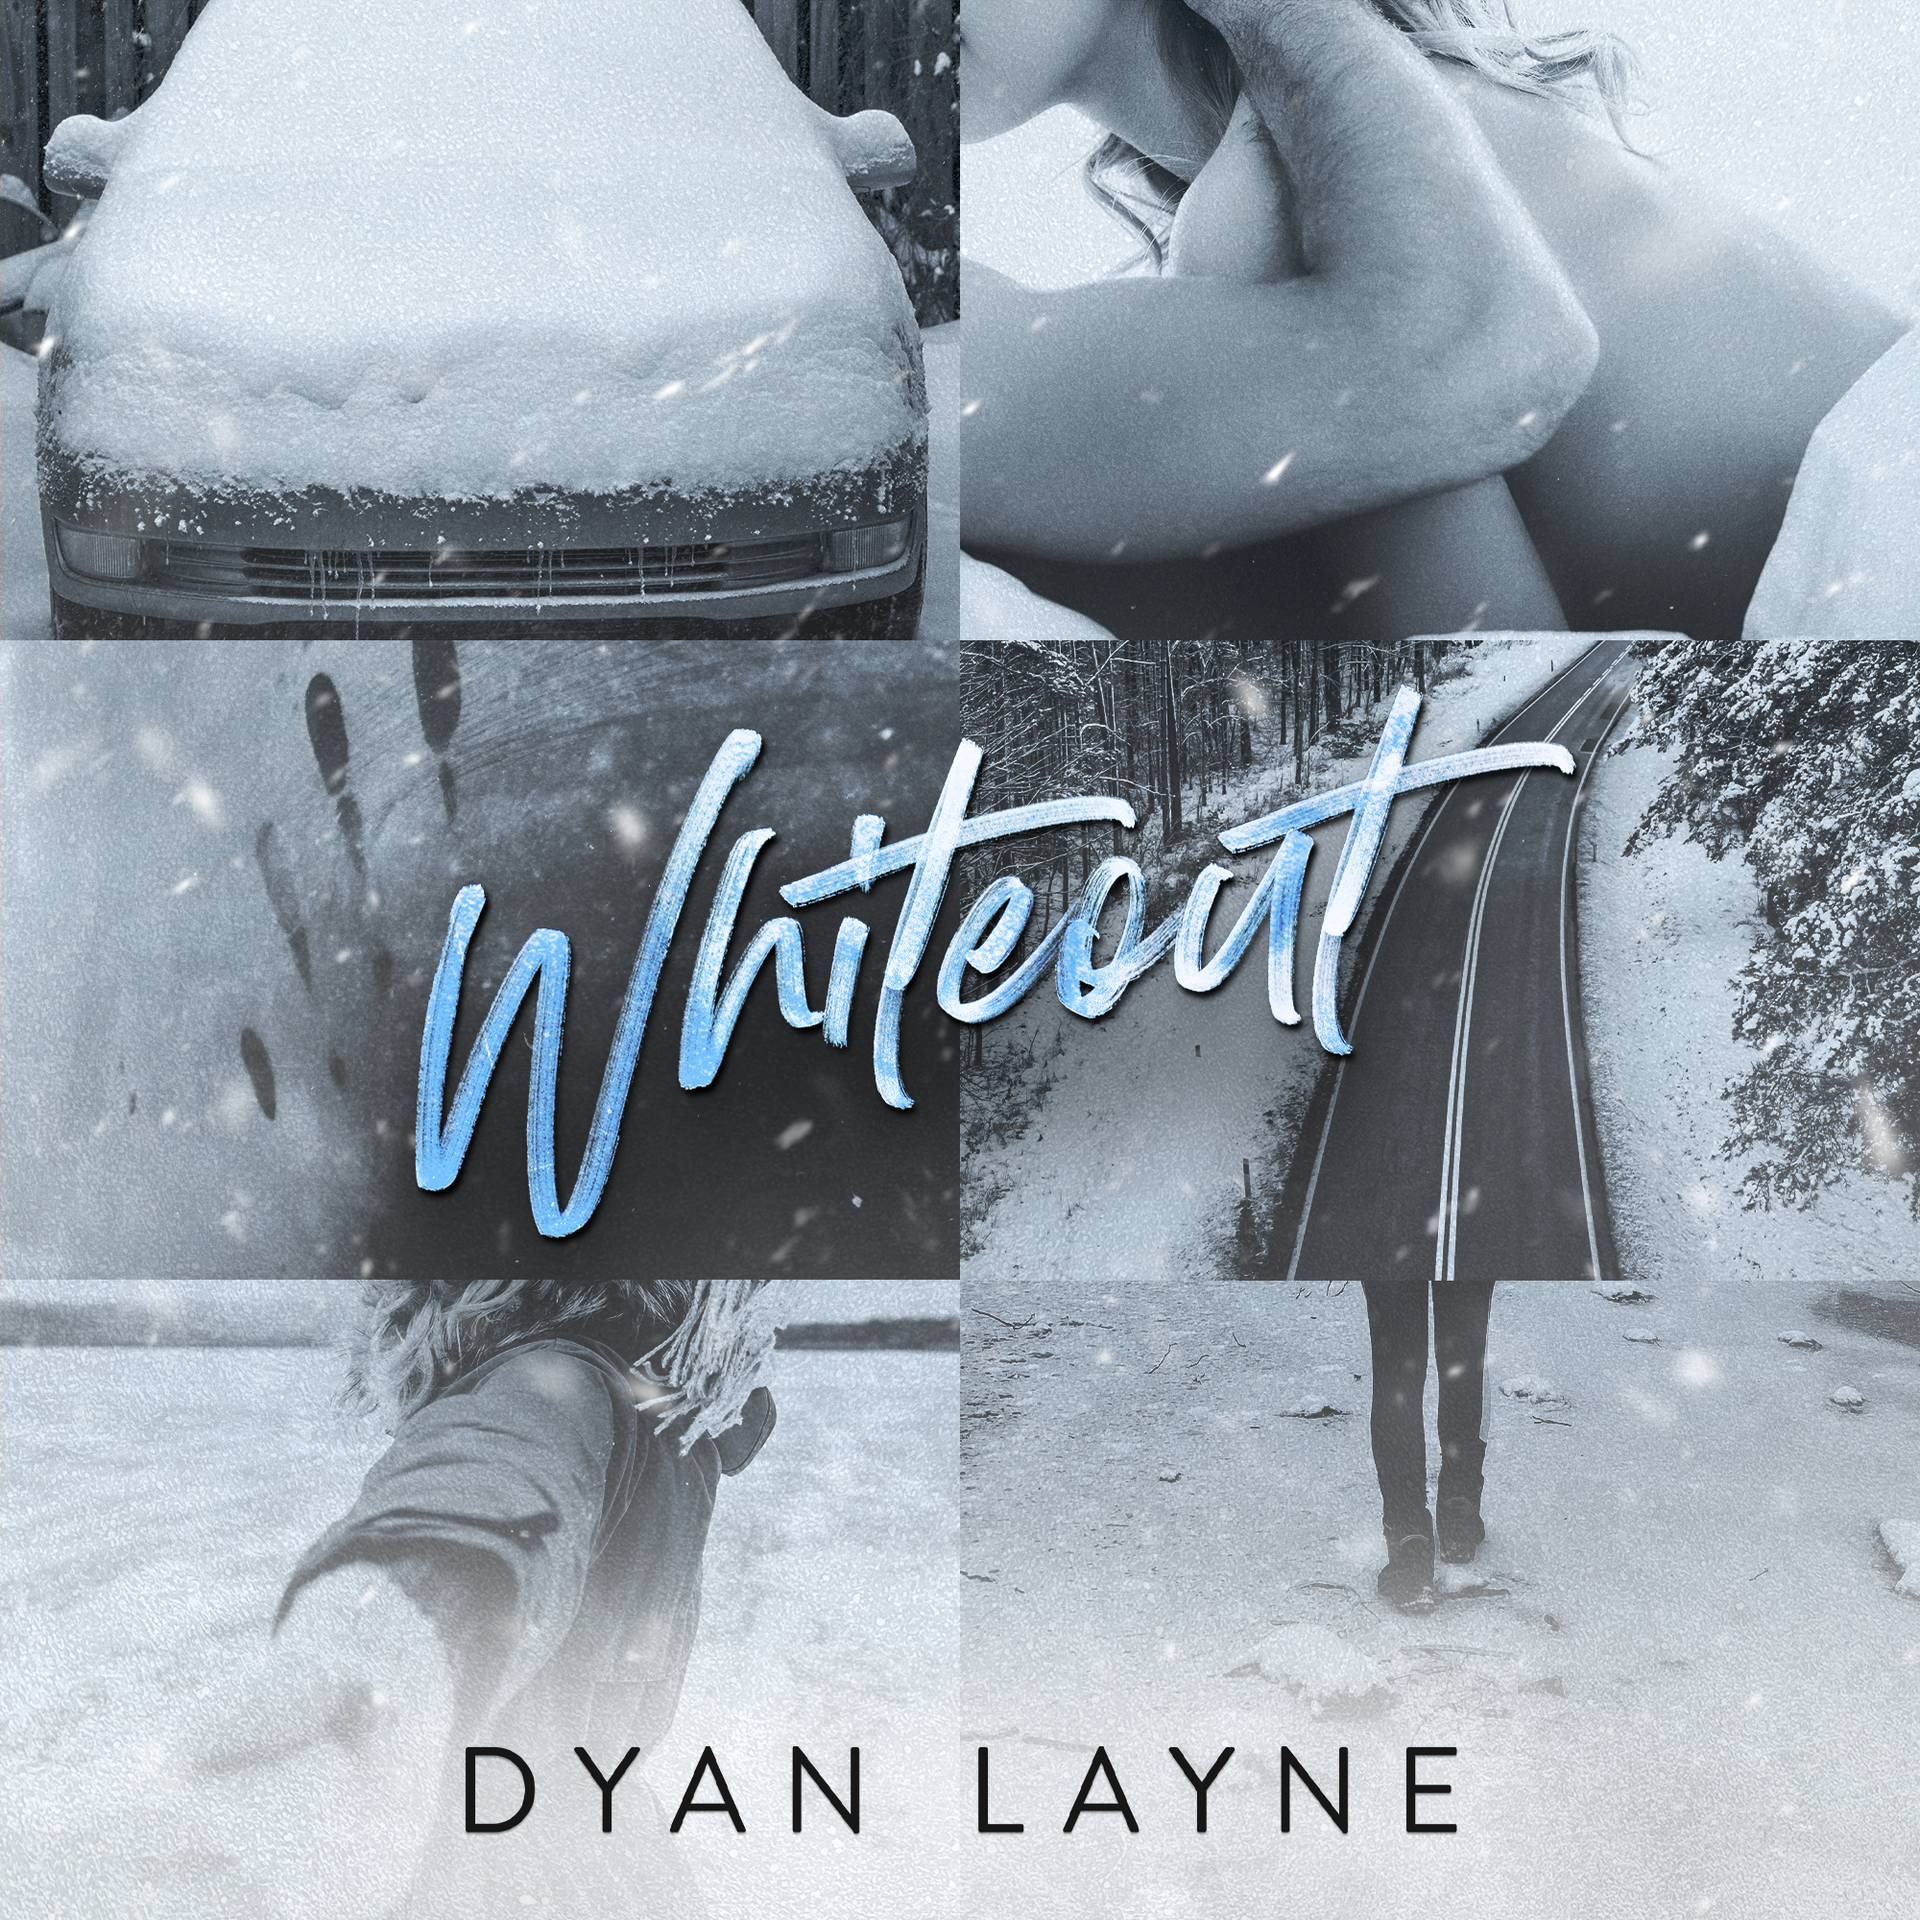 The cover ofa book called whiteout by dylan layne